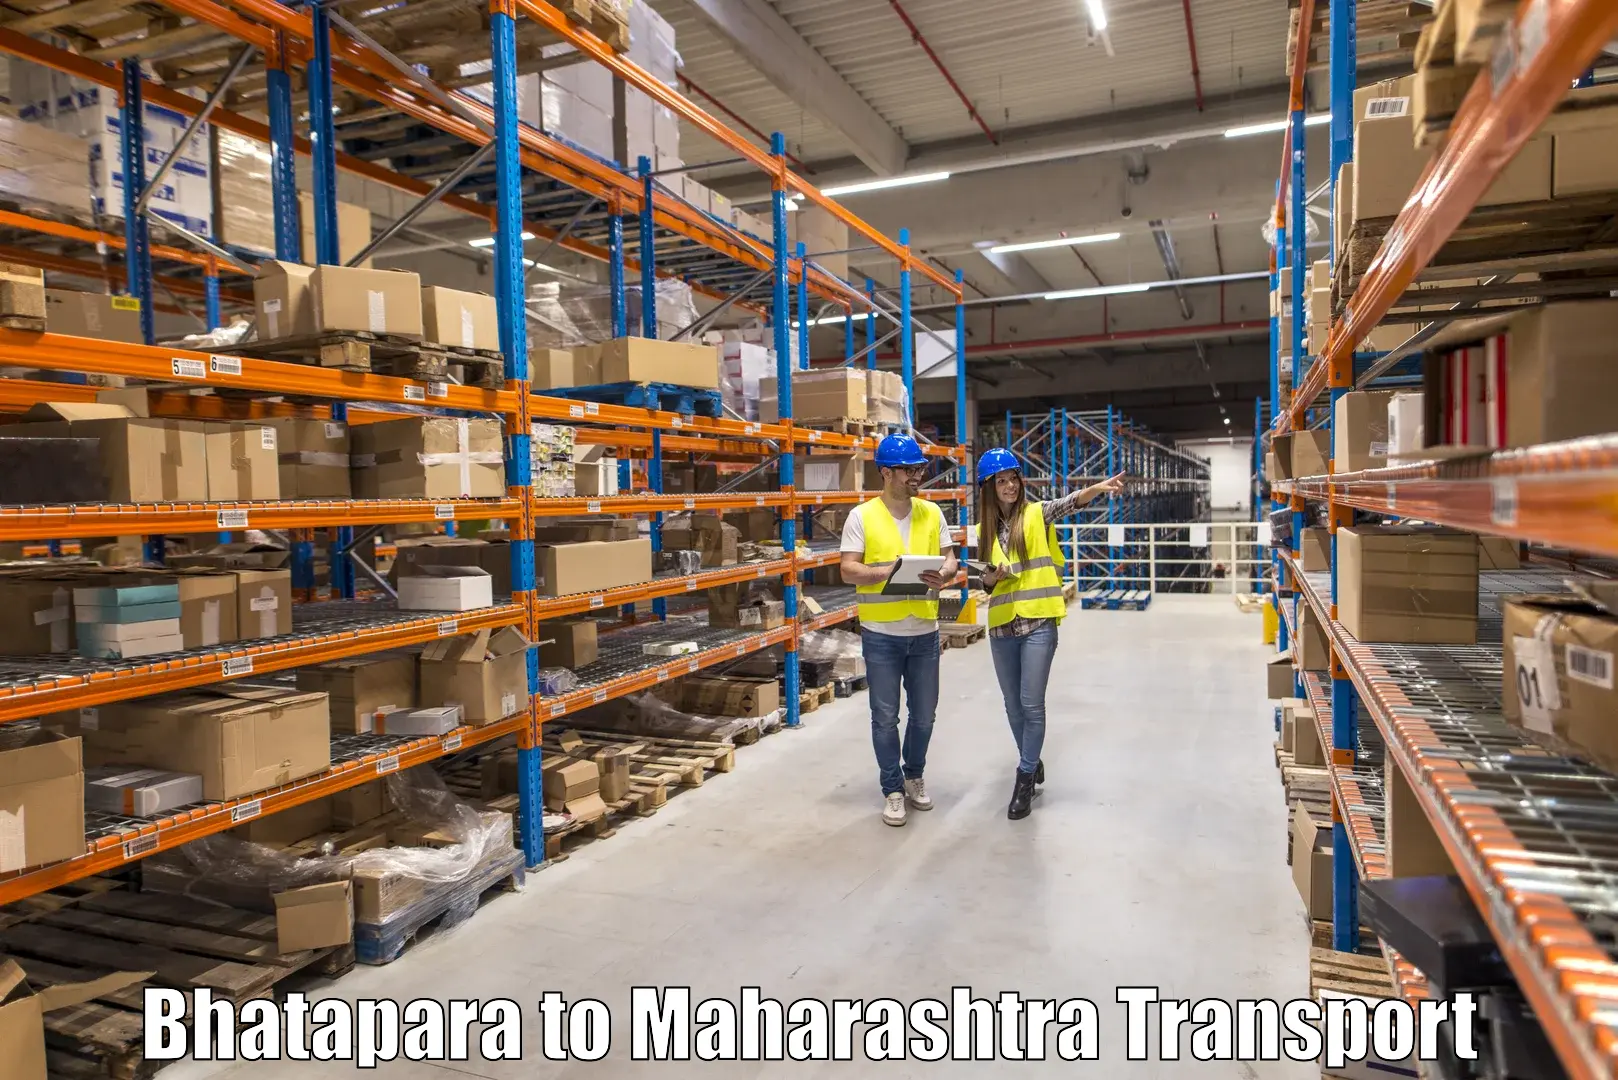 Truck transport companies in India Bhatapara to Jamkhed